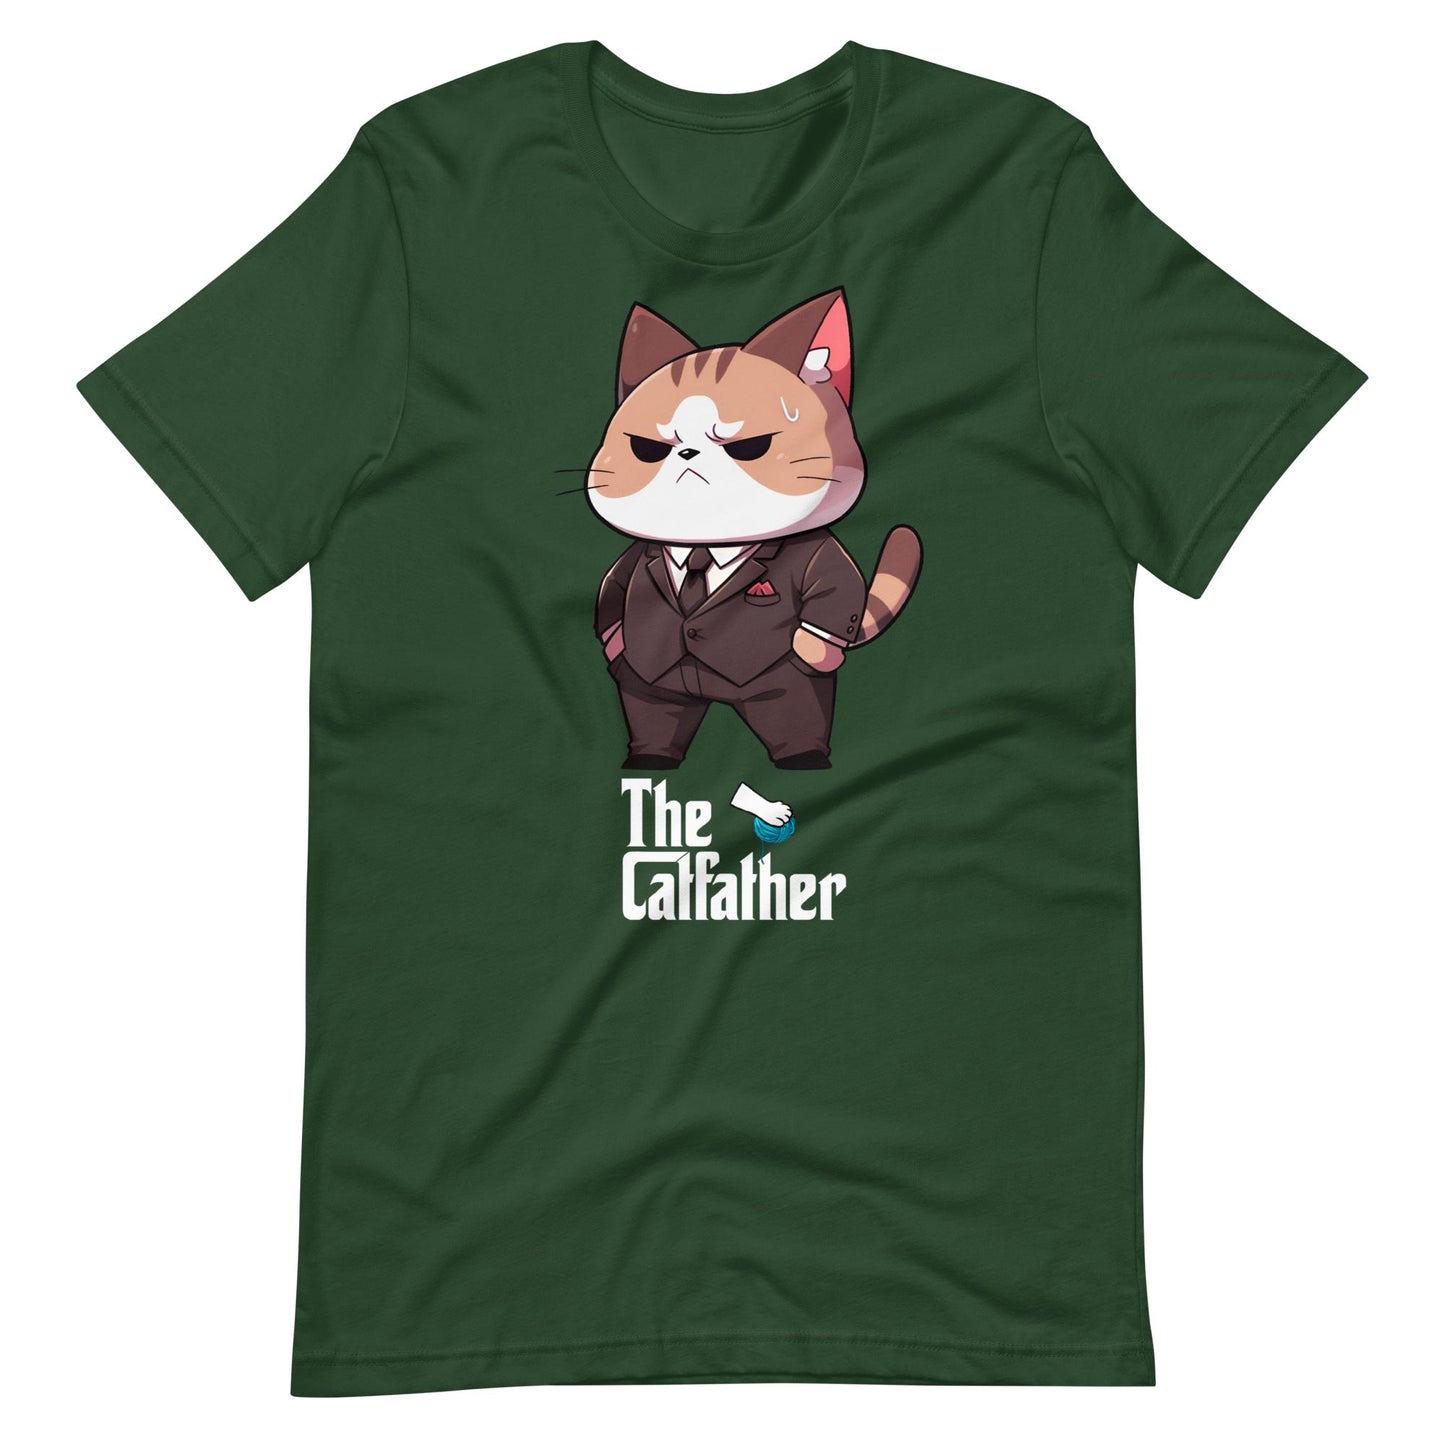 The Catfather T-Shirt